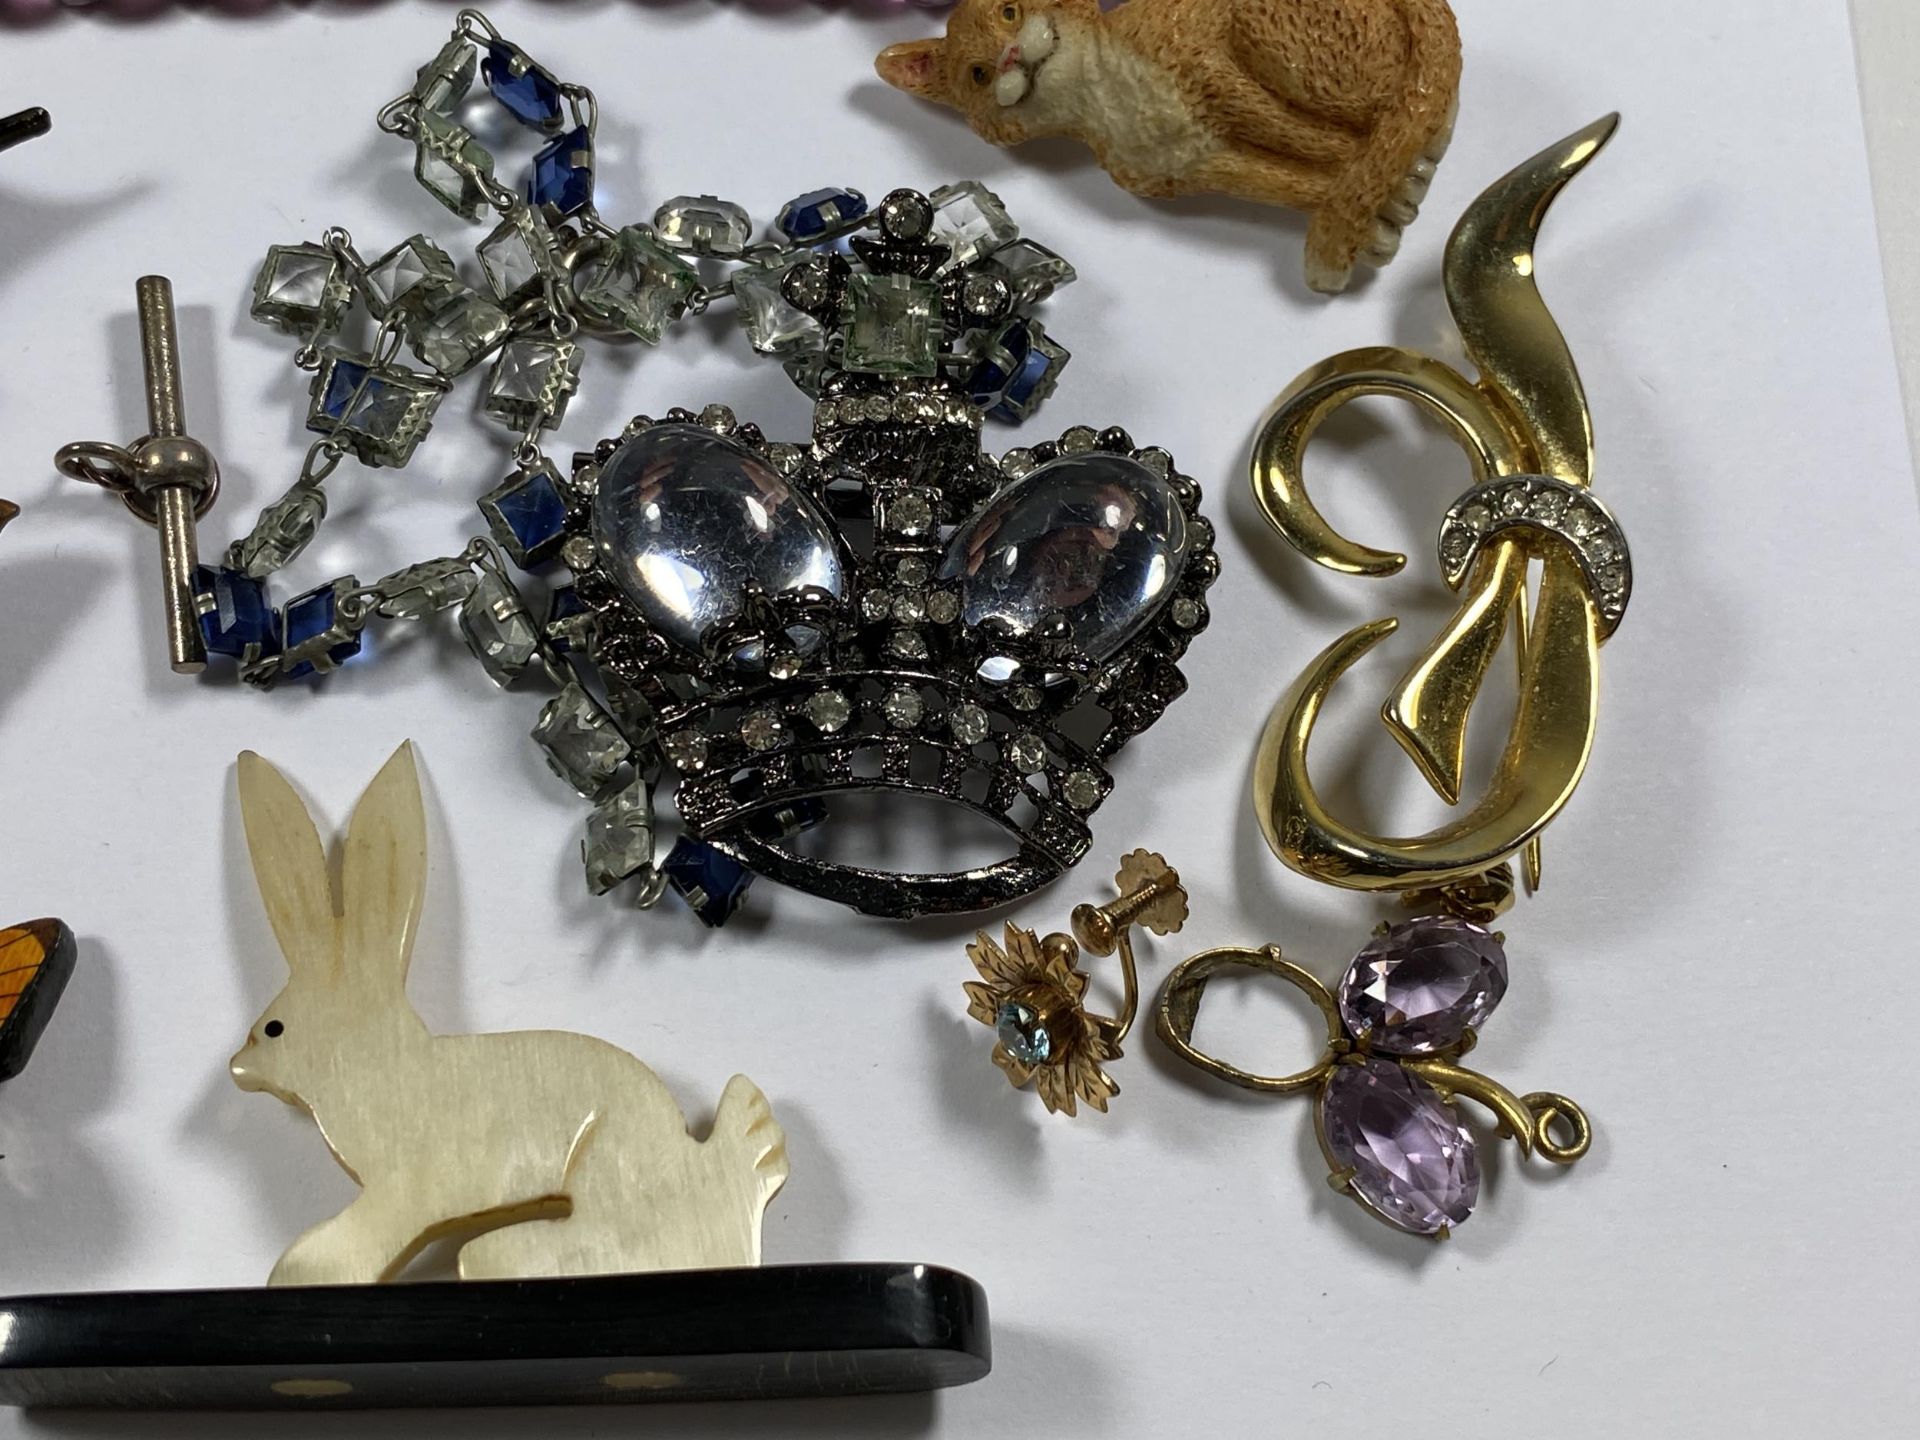 A MIXED LOT OF VINTAGE AND FURTHER COSTUME JEWELLERY, BUTTERFLY BROOCHES, CAMEO BROOCH, 9CT YELLOW - Image 3 of 5